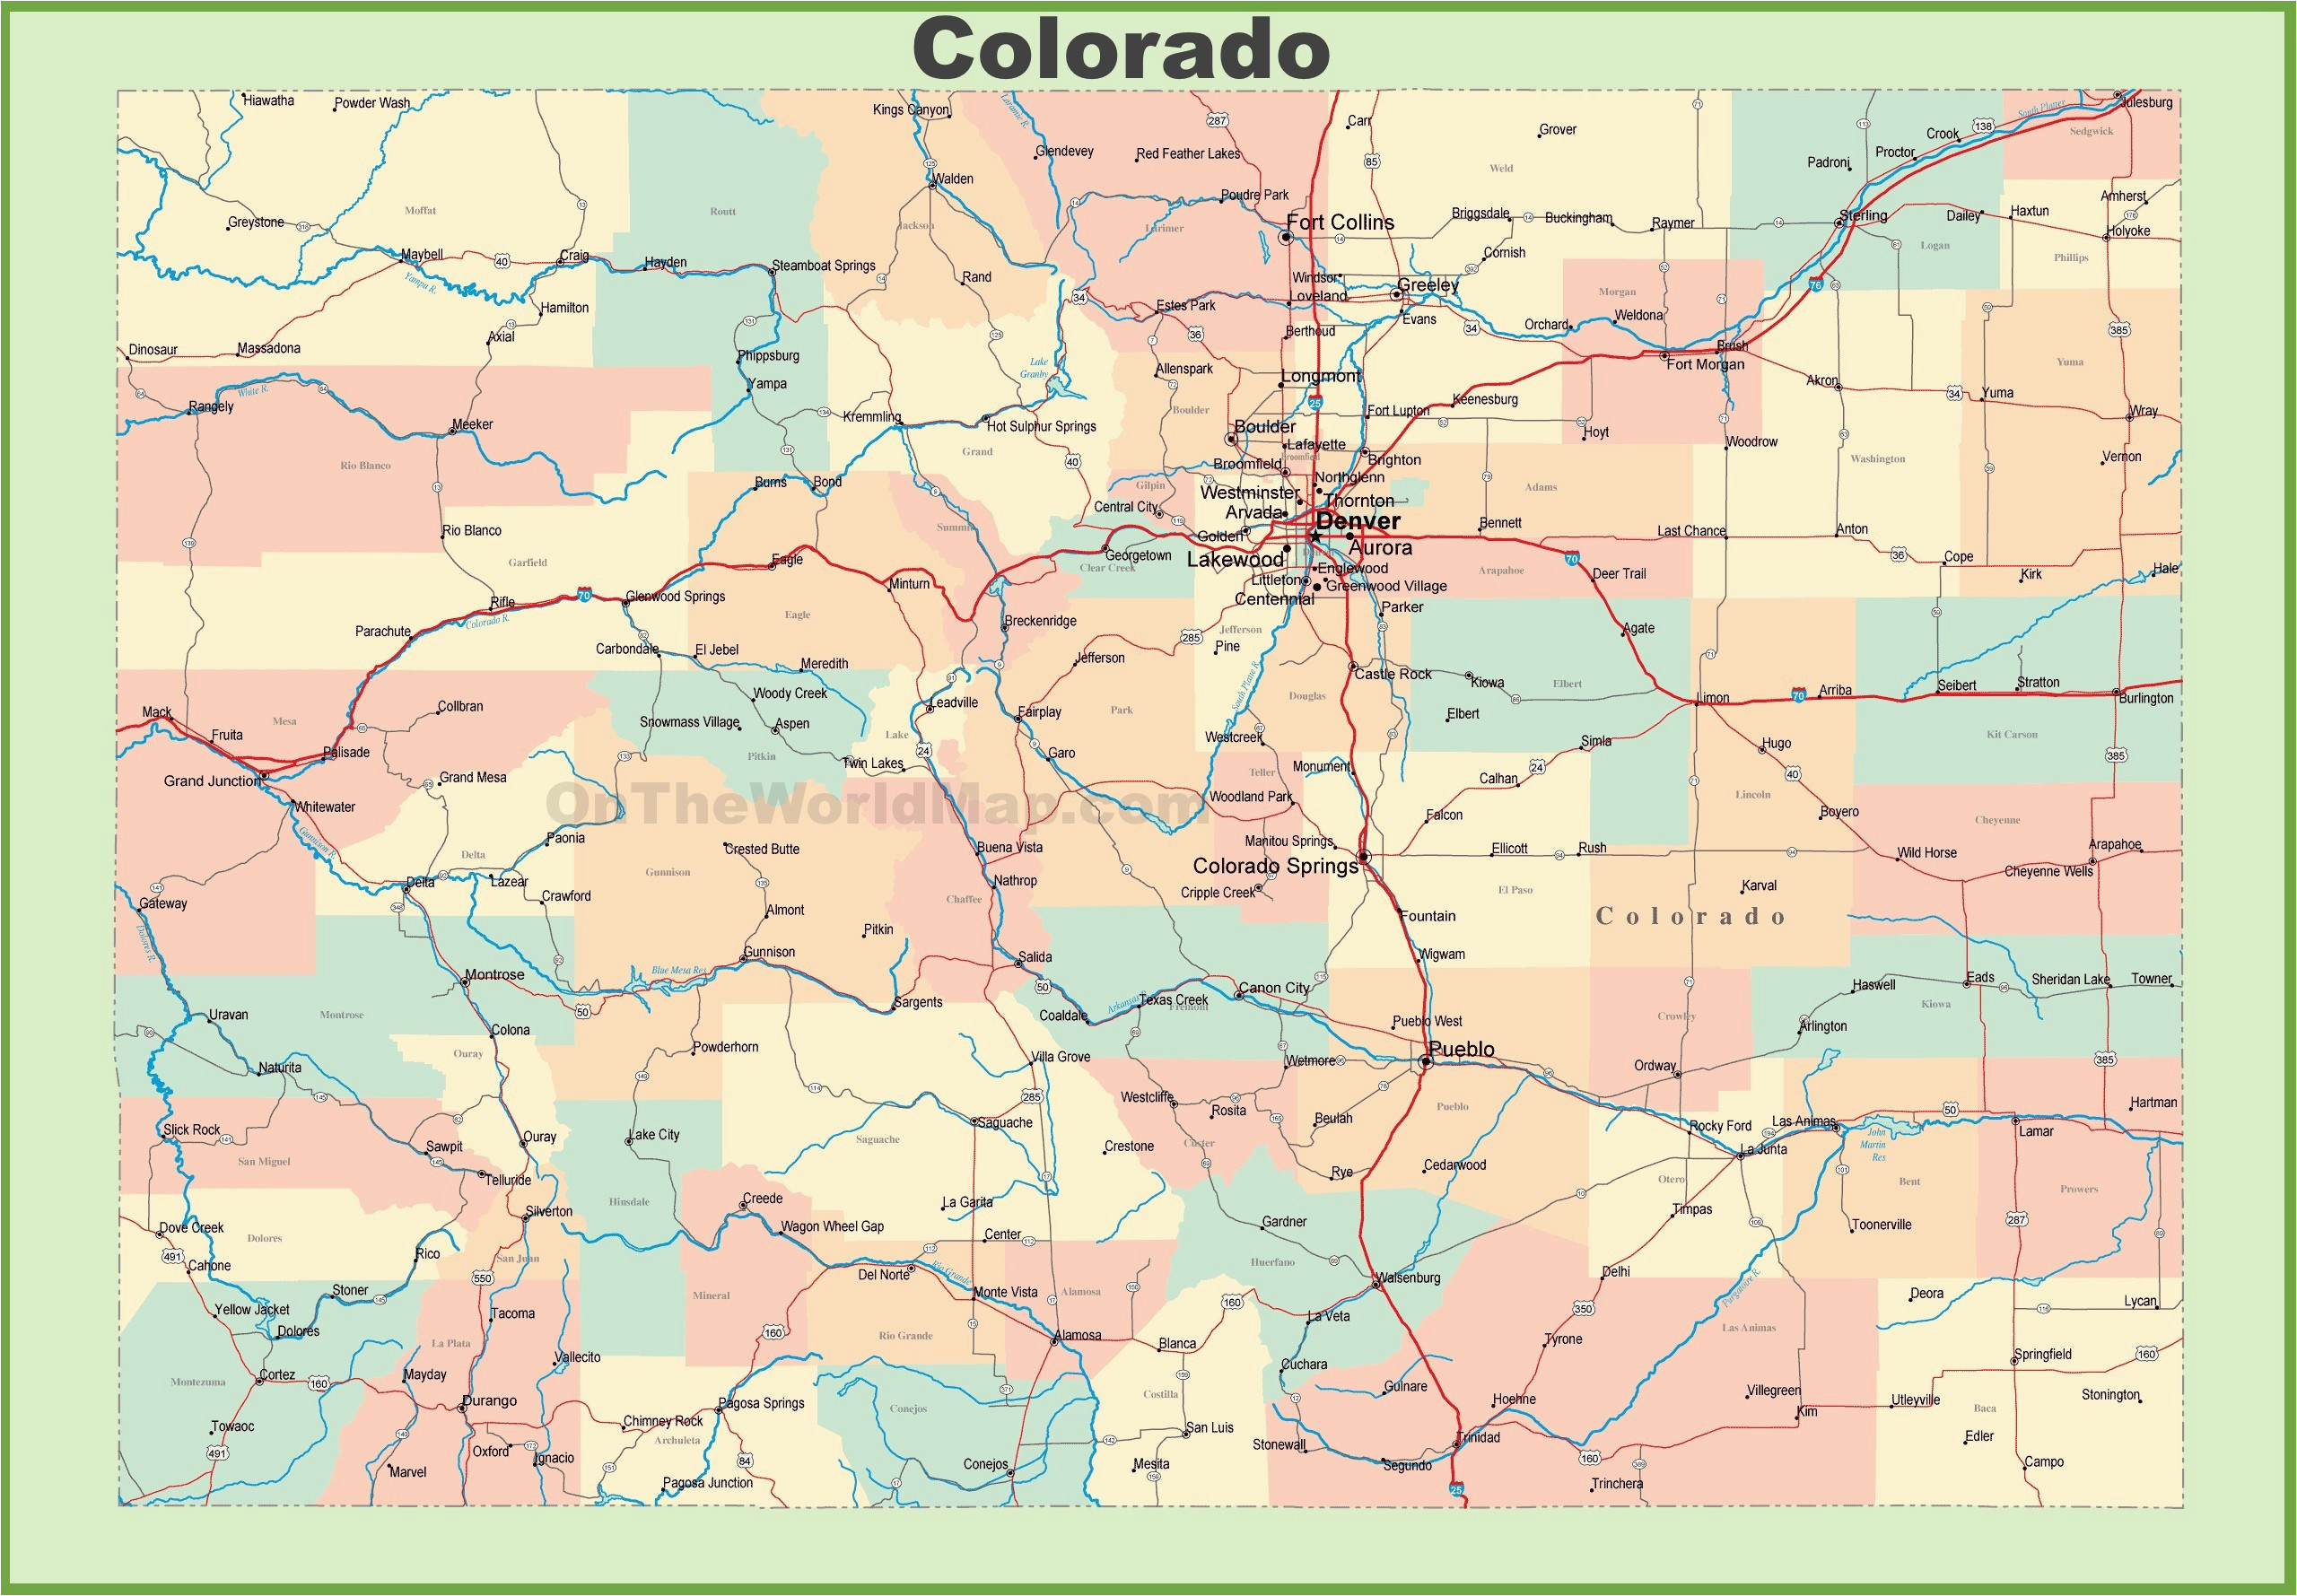 Colorado Beer Map Colorado Brewery Map Awesome the Ultimate Guide to Craft Brewing In